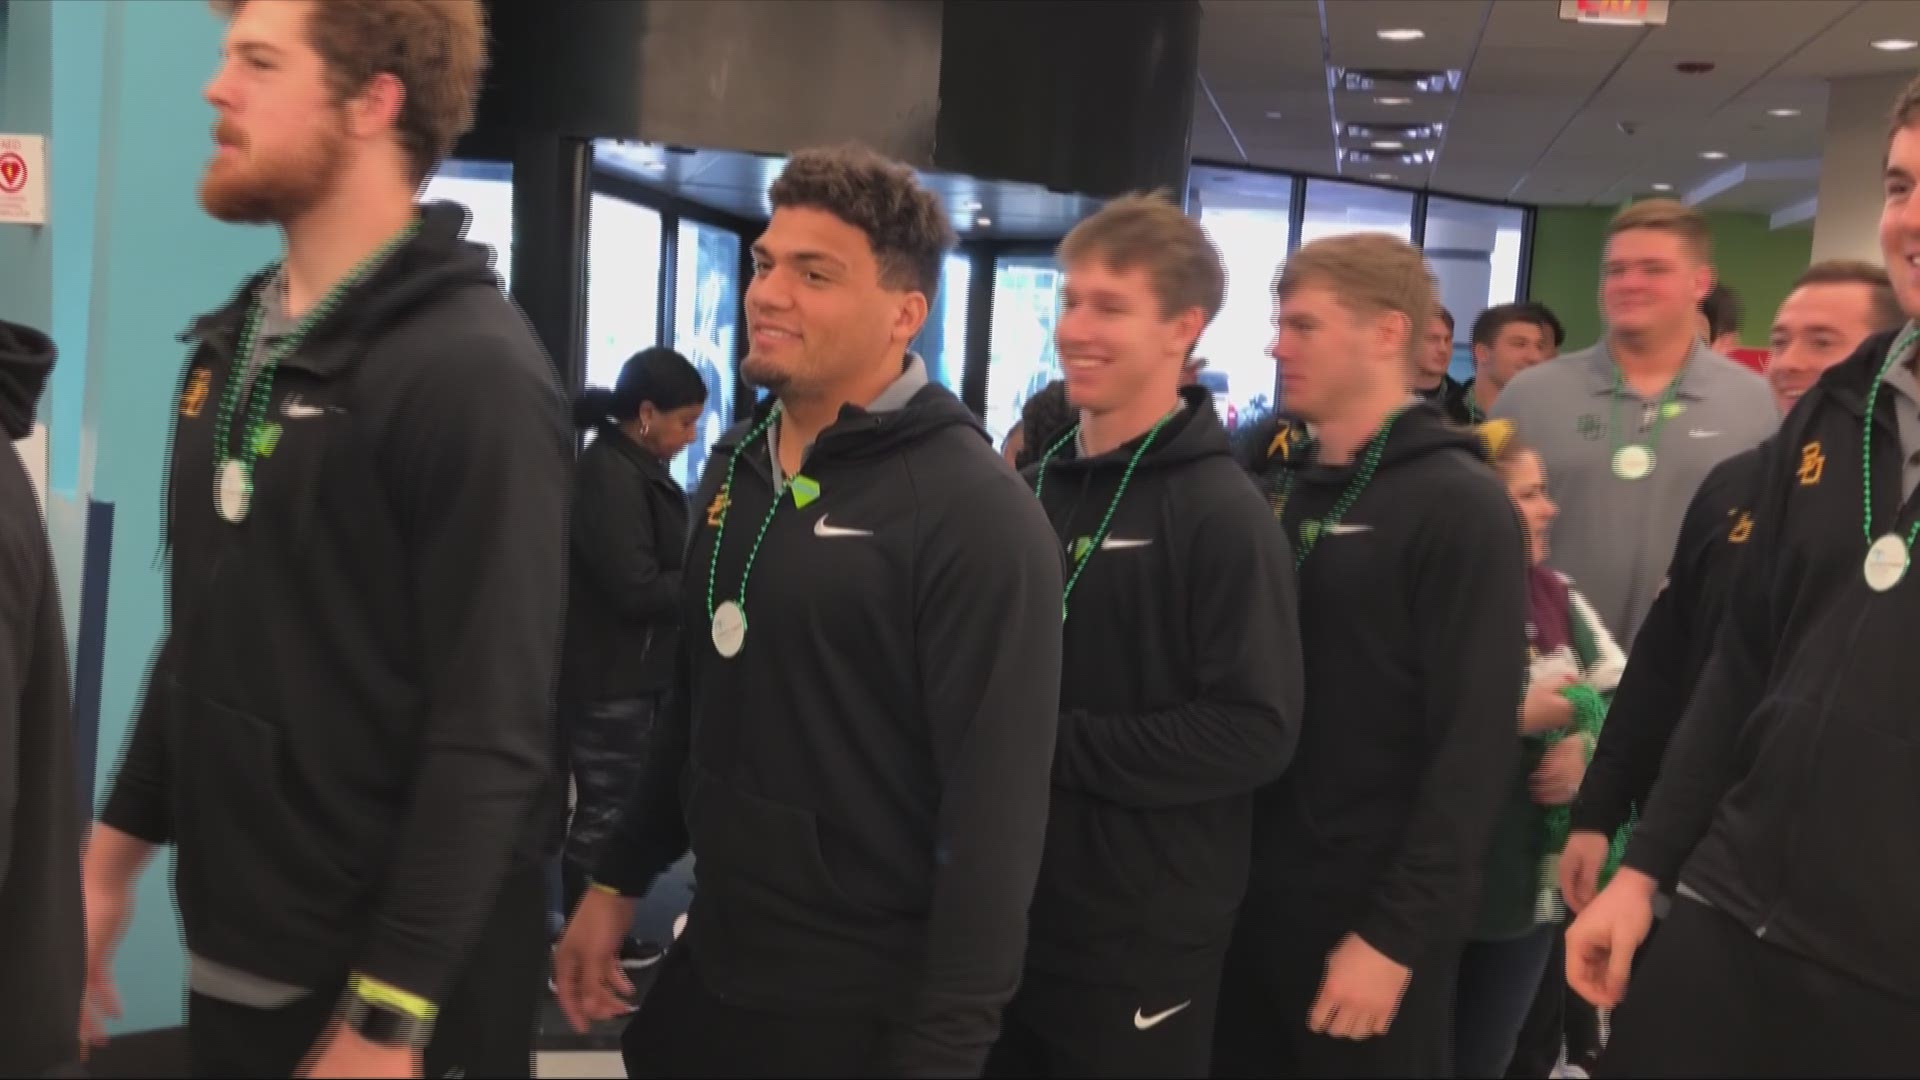 Baylor Bears were greeted by a band as they arrived at Children's Hospital on New Orleans ahead of the Sugar Bowl on Dec 30, 2019.